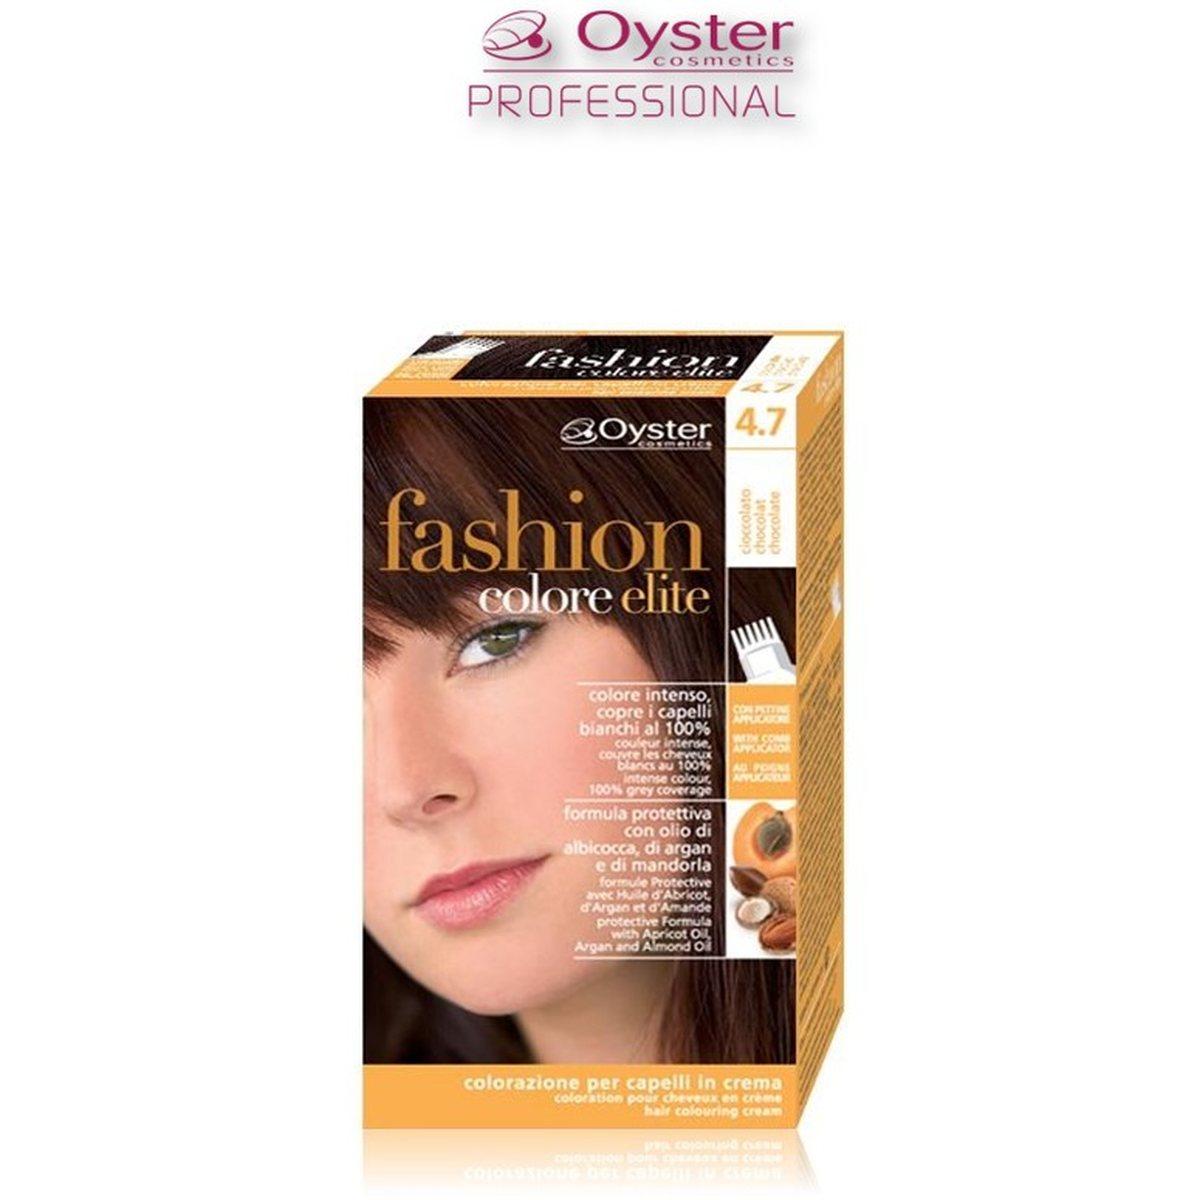 Oyster Kit Fashion Color Elite 4/7 ( Castano Cacao ) 50 ml + 50 ml